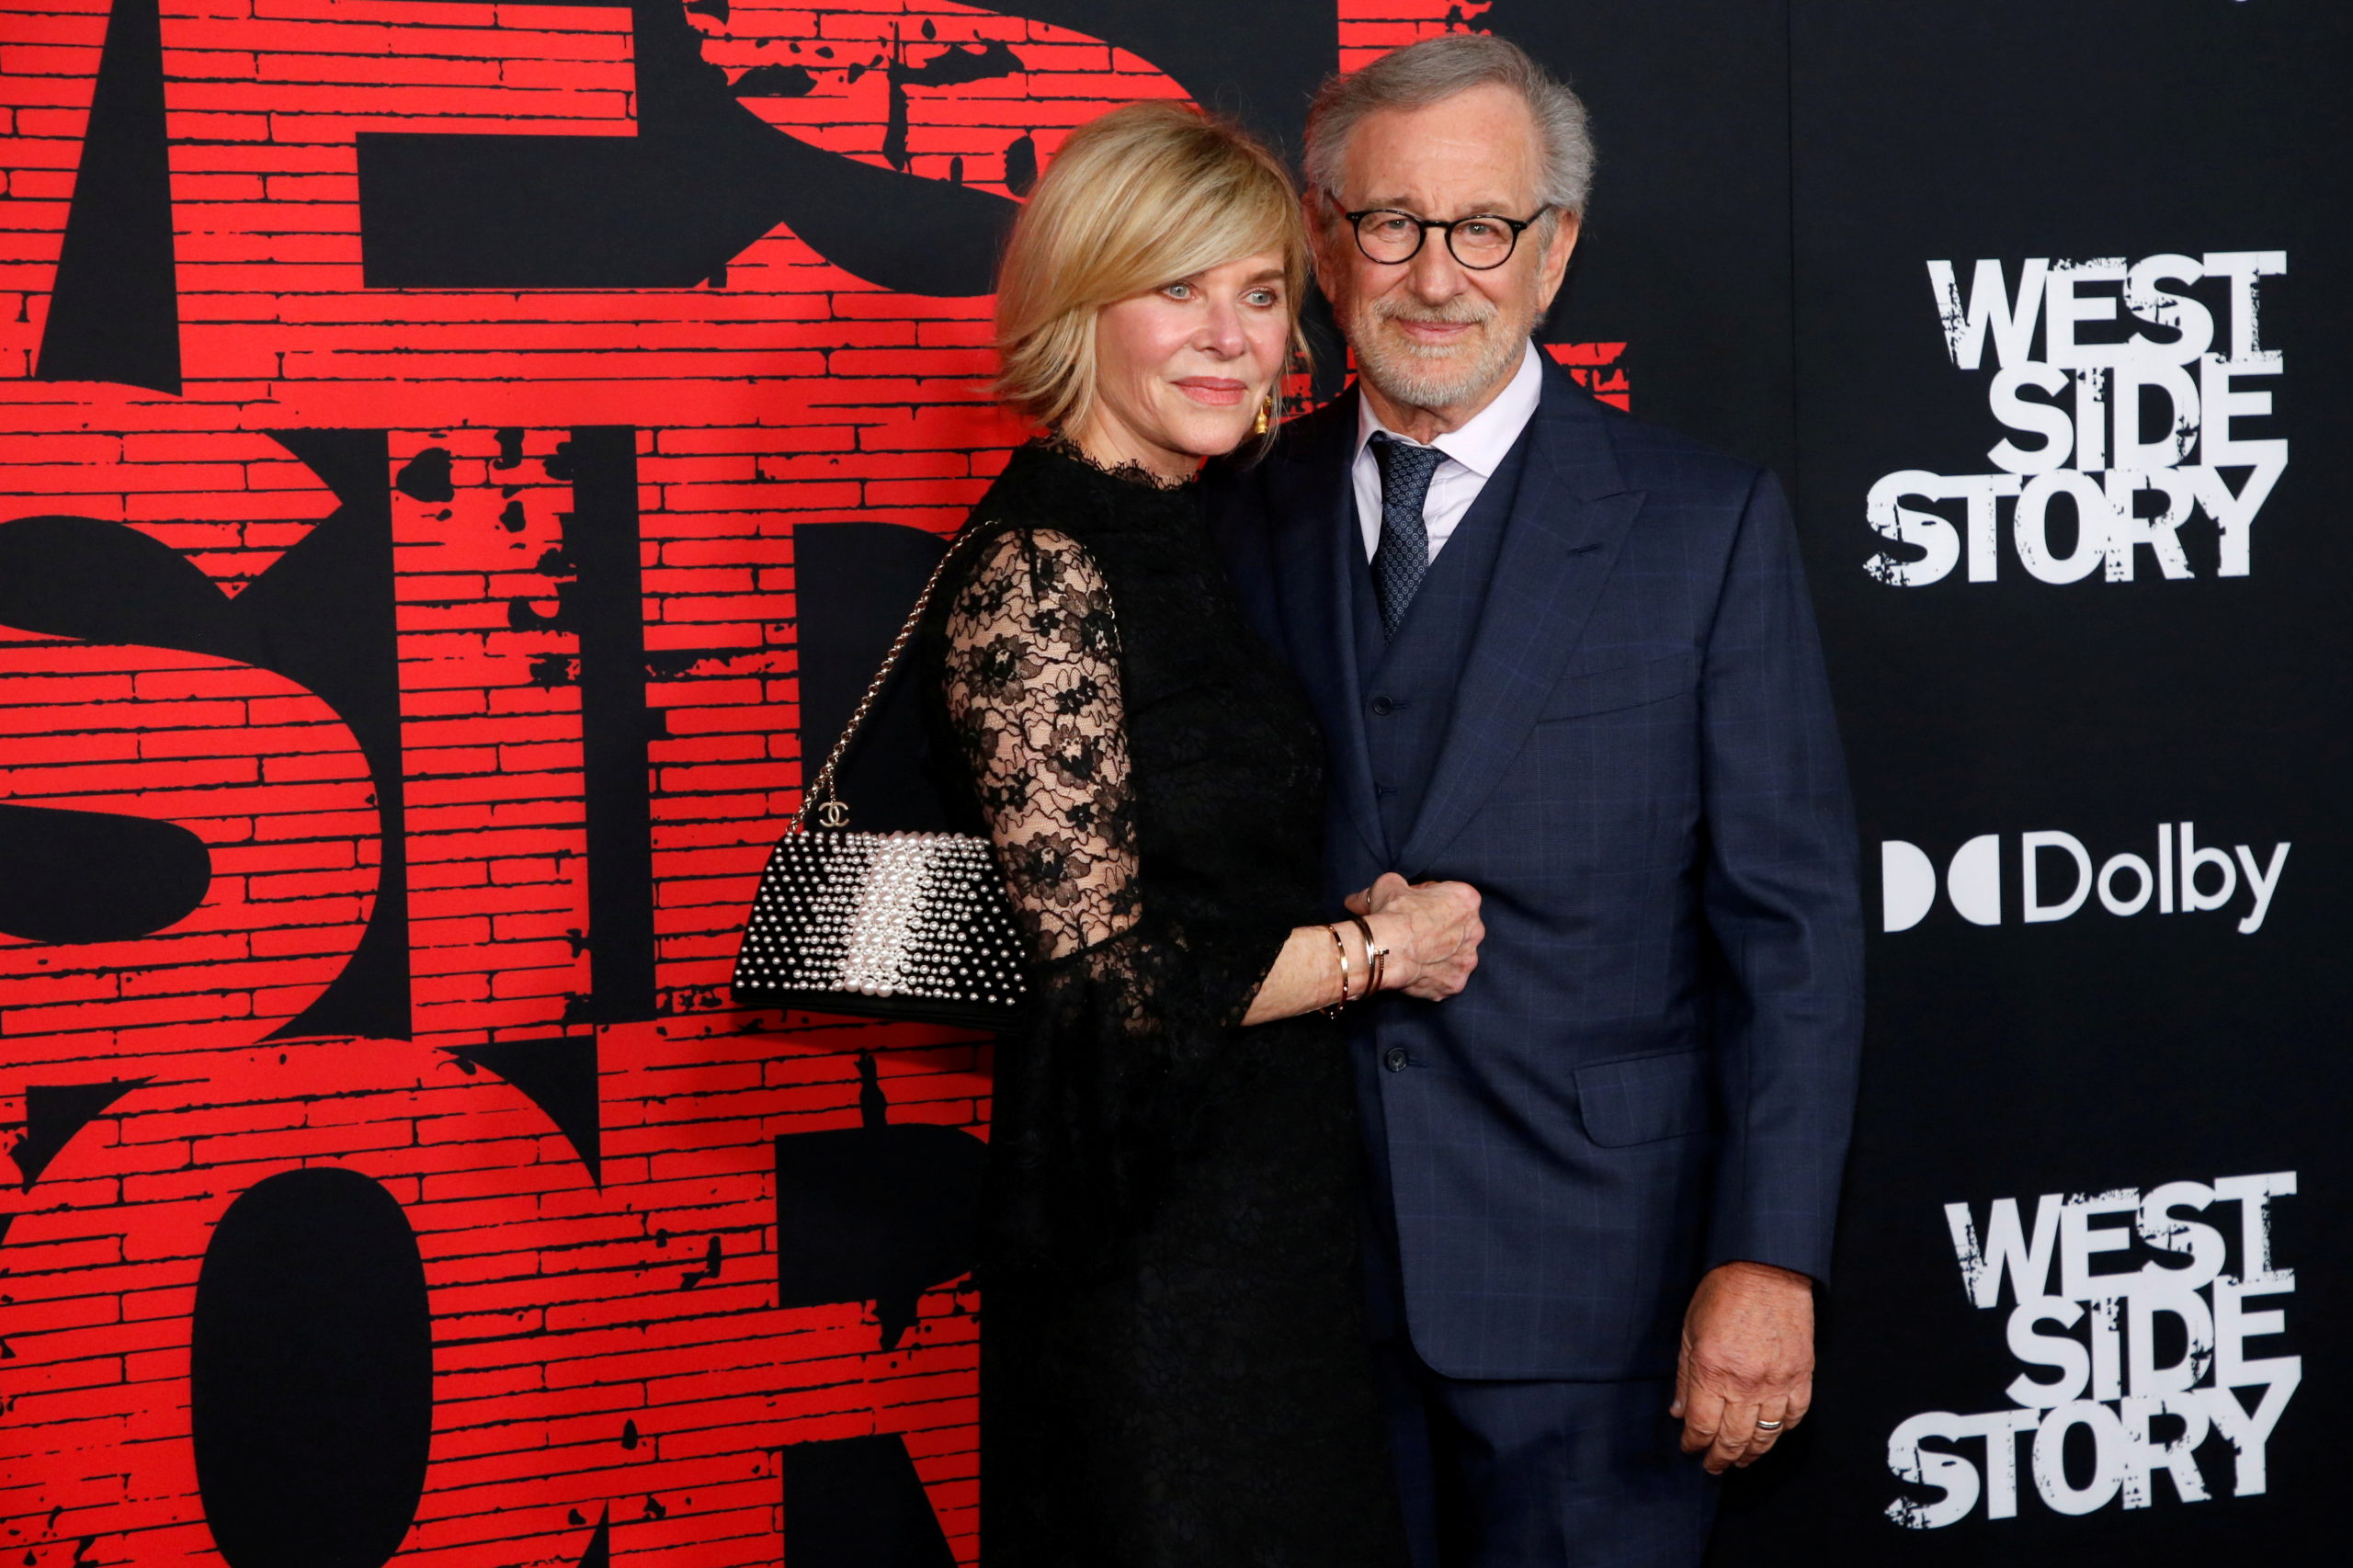 Kate Capshaw and Steven Spielberg attend the premiere for the film West Side Story at El Capitan theatre in Los Angeles, California, U.S. December 7, 2021. REUTERS/Mario Anzuoni